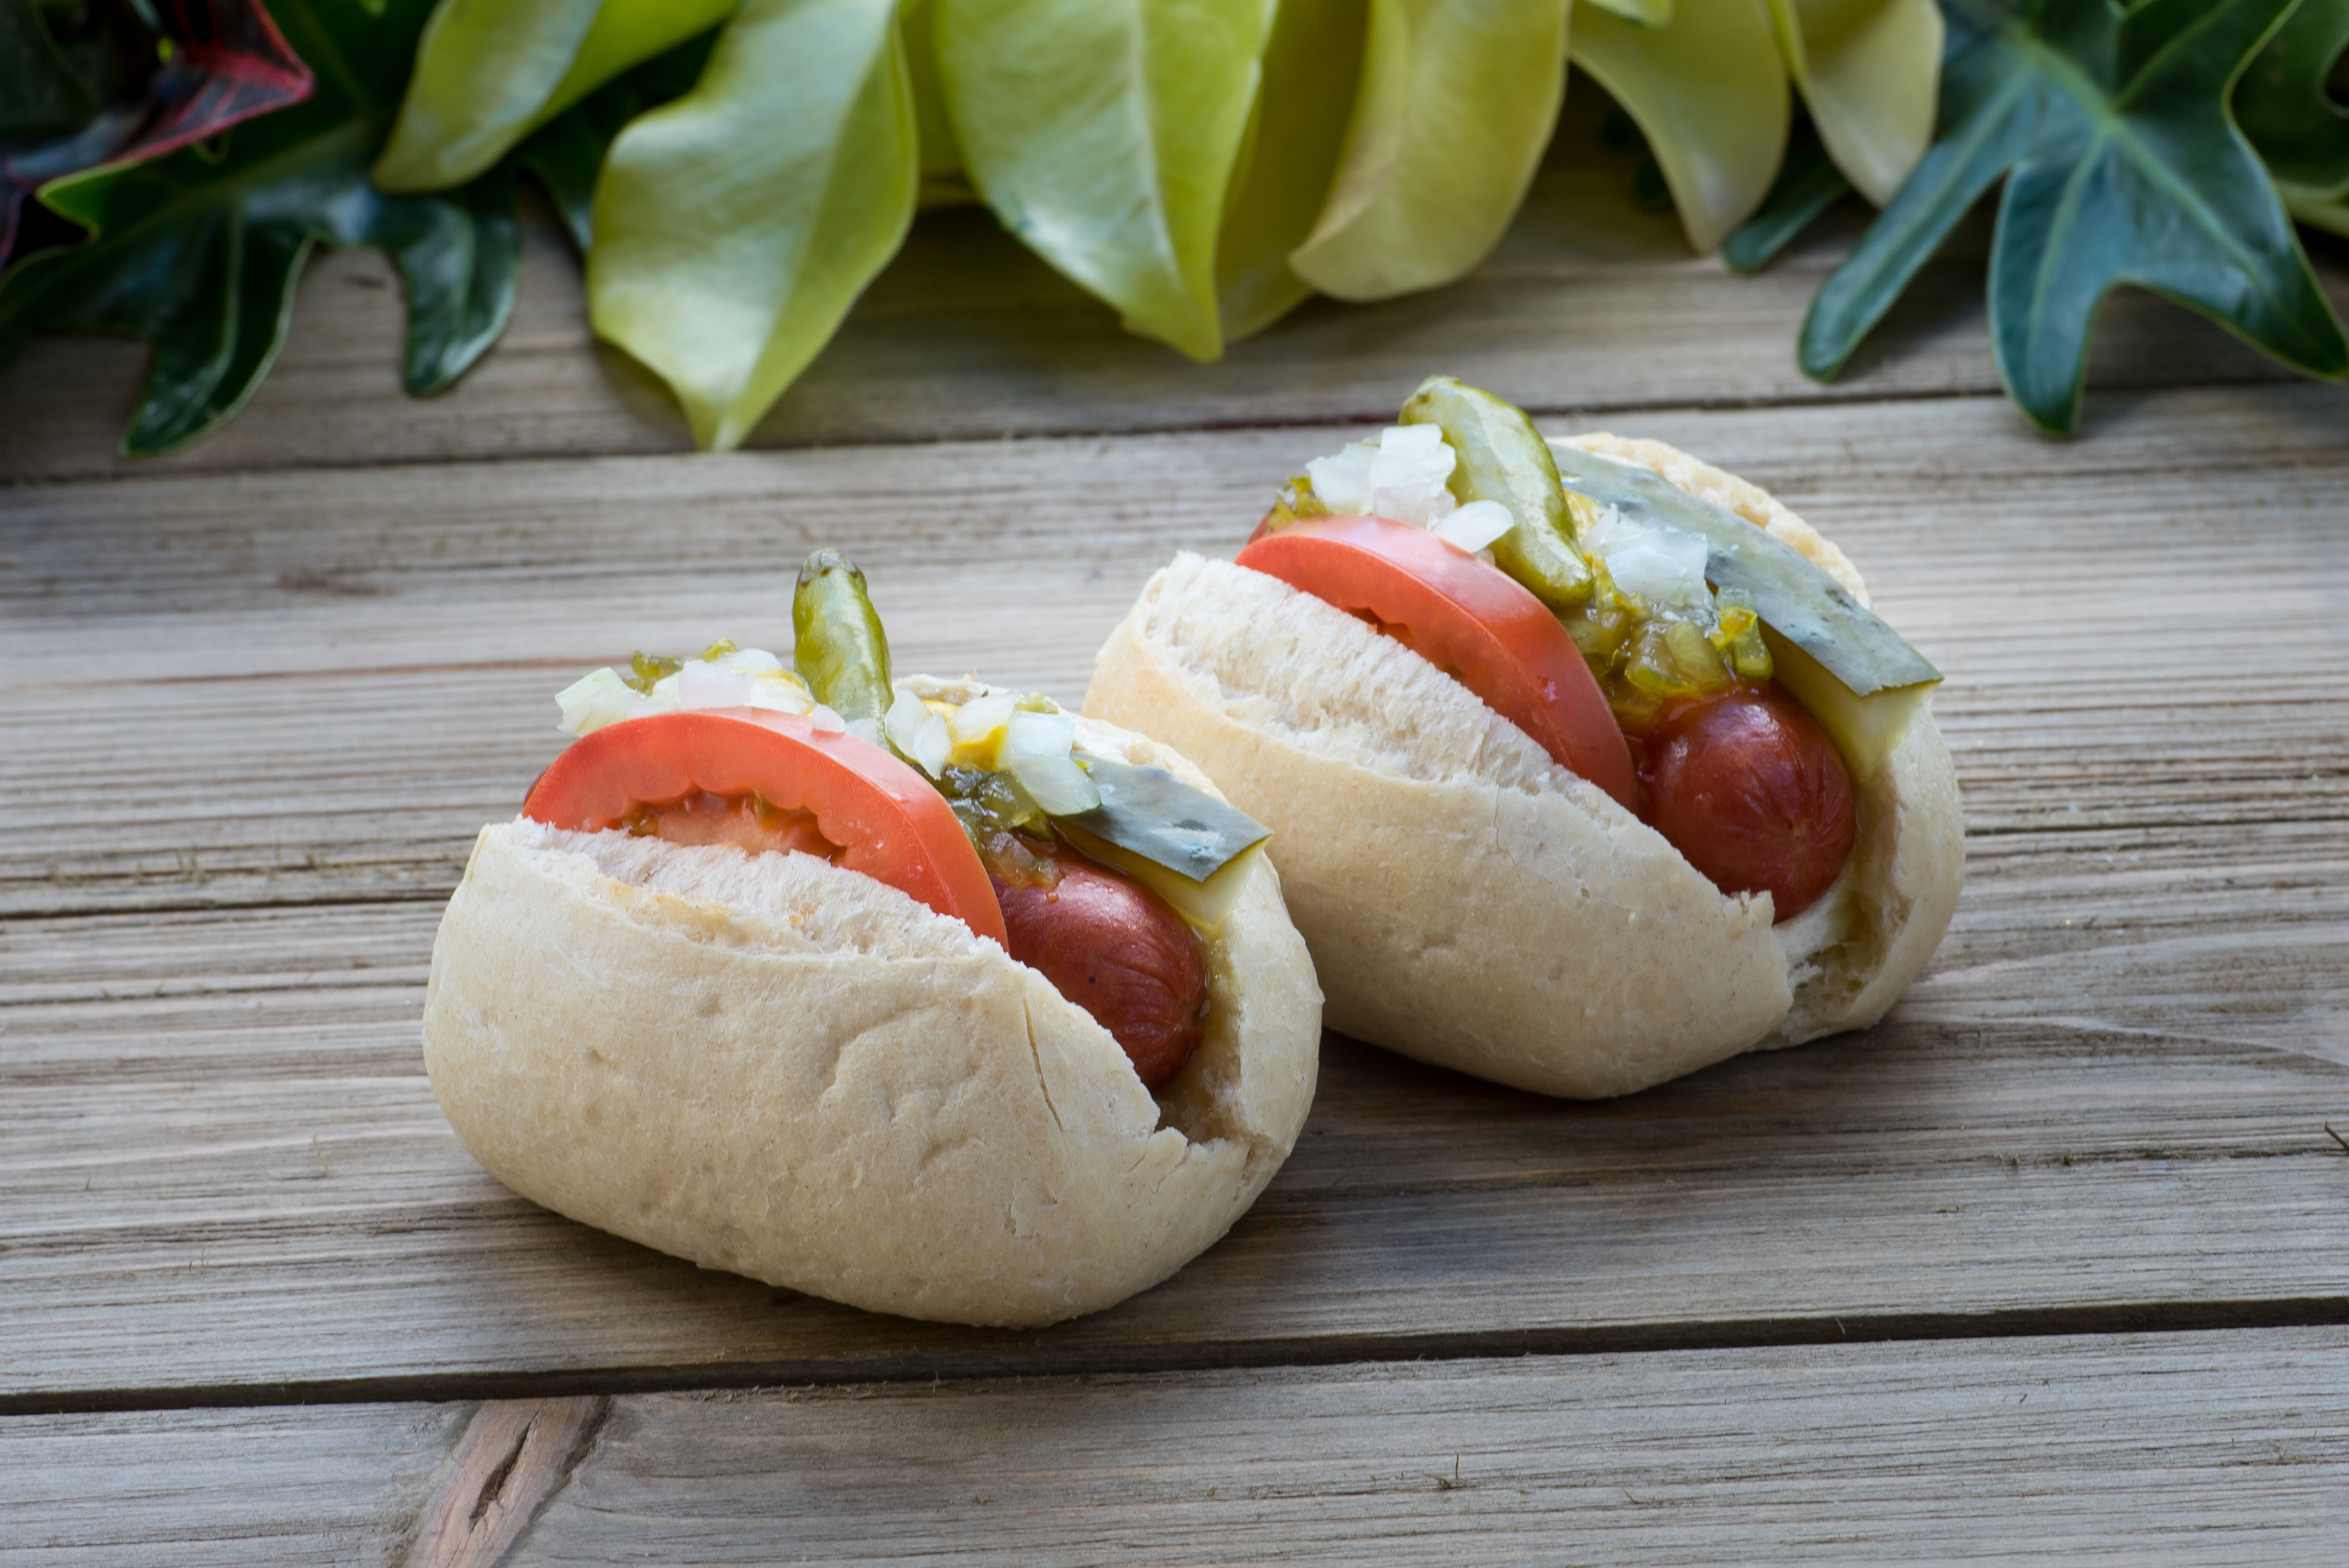 NEW Chicago-style Hot Dog Sliders at the All-American Market